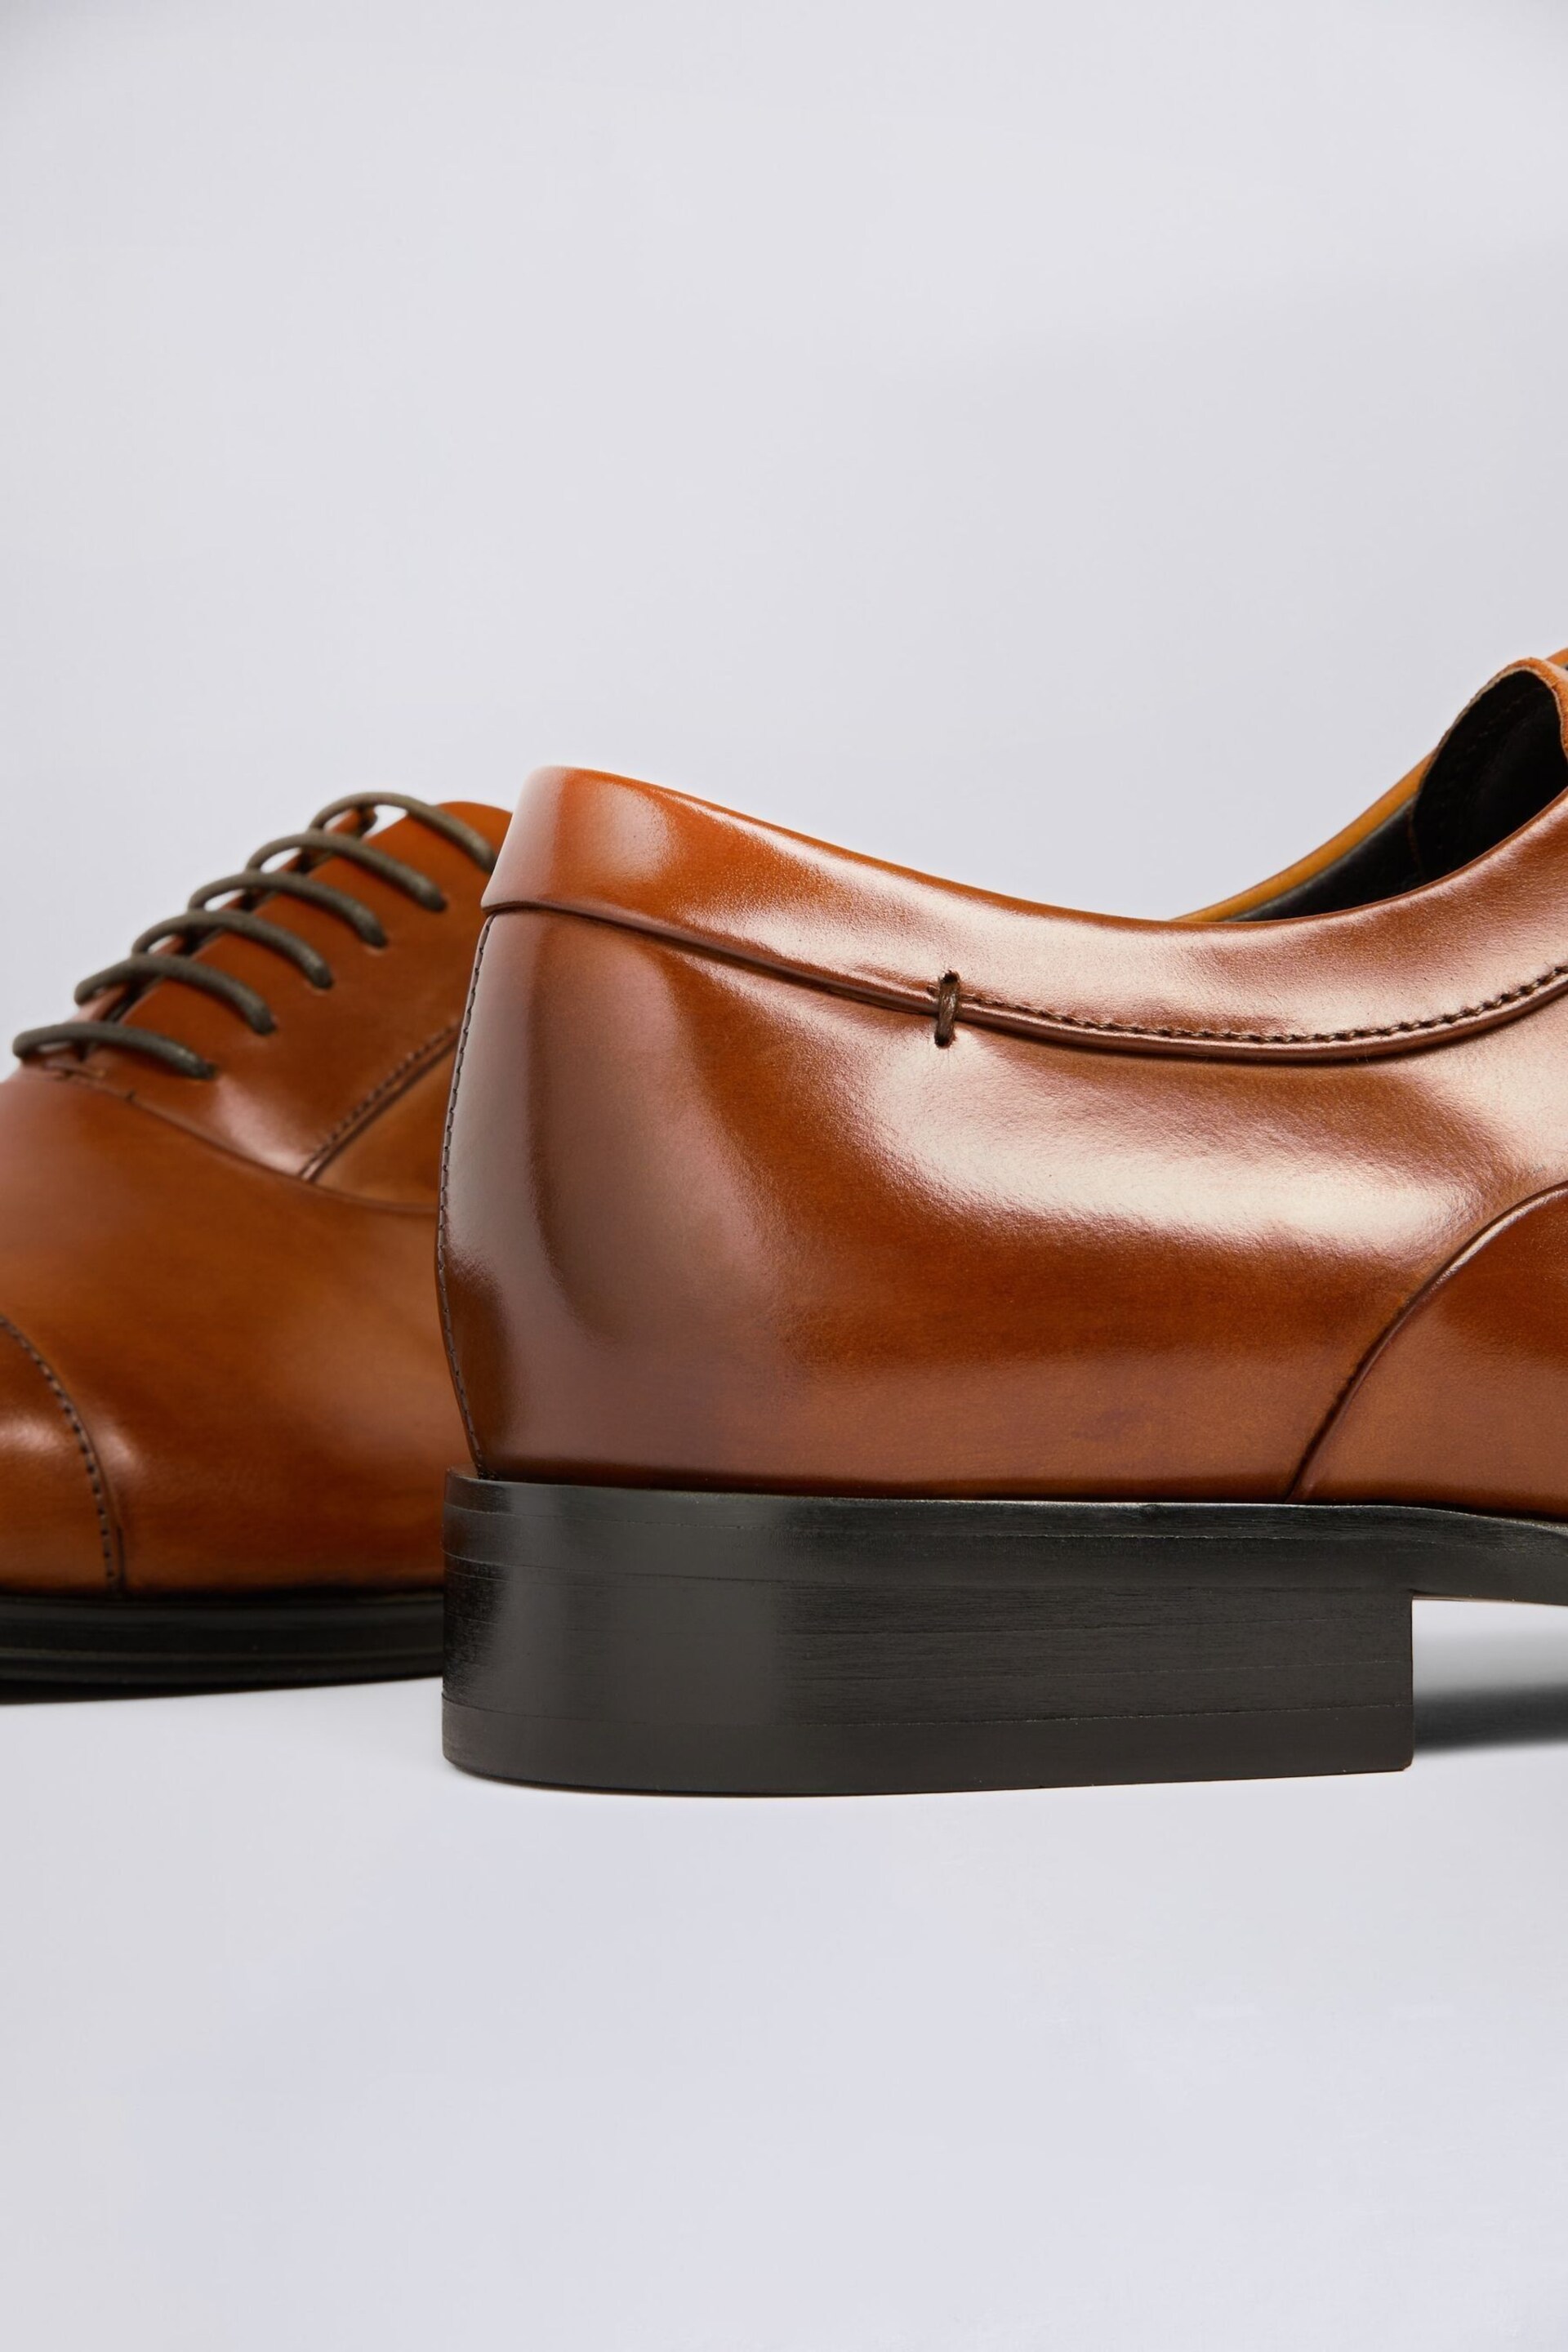 MOSS John Guildhall Oxford Shoes - Image 4 of 5